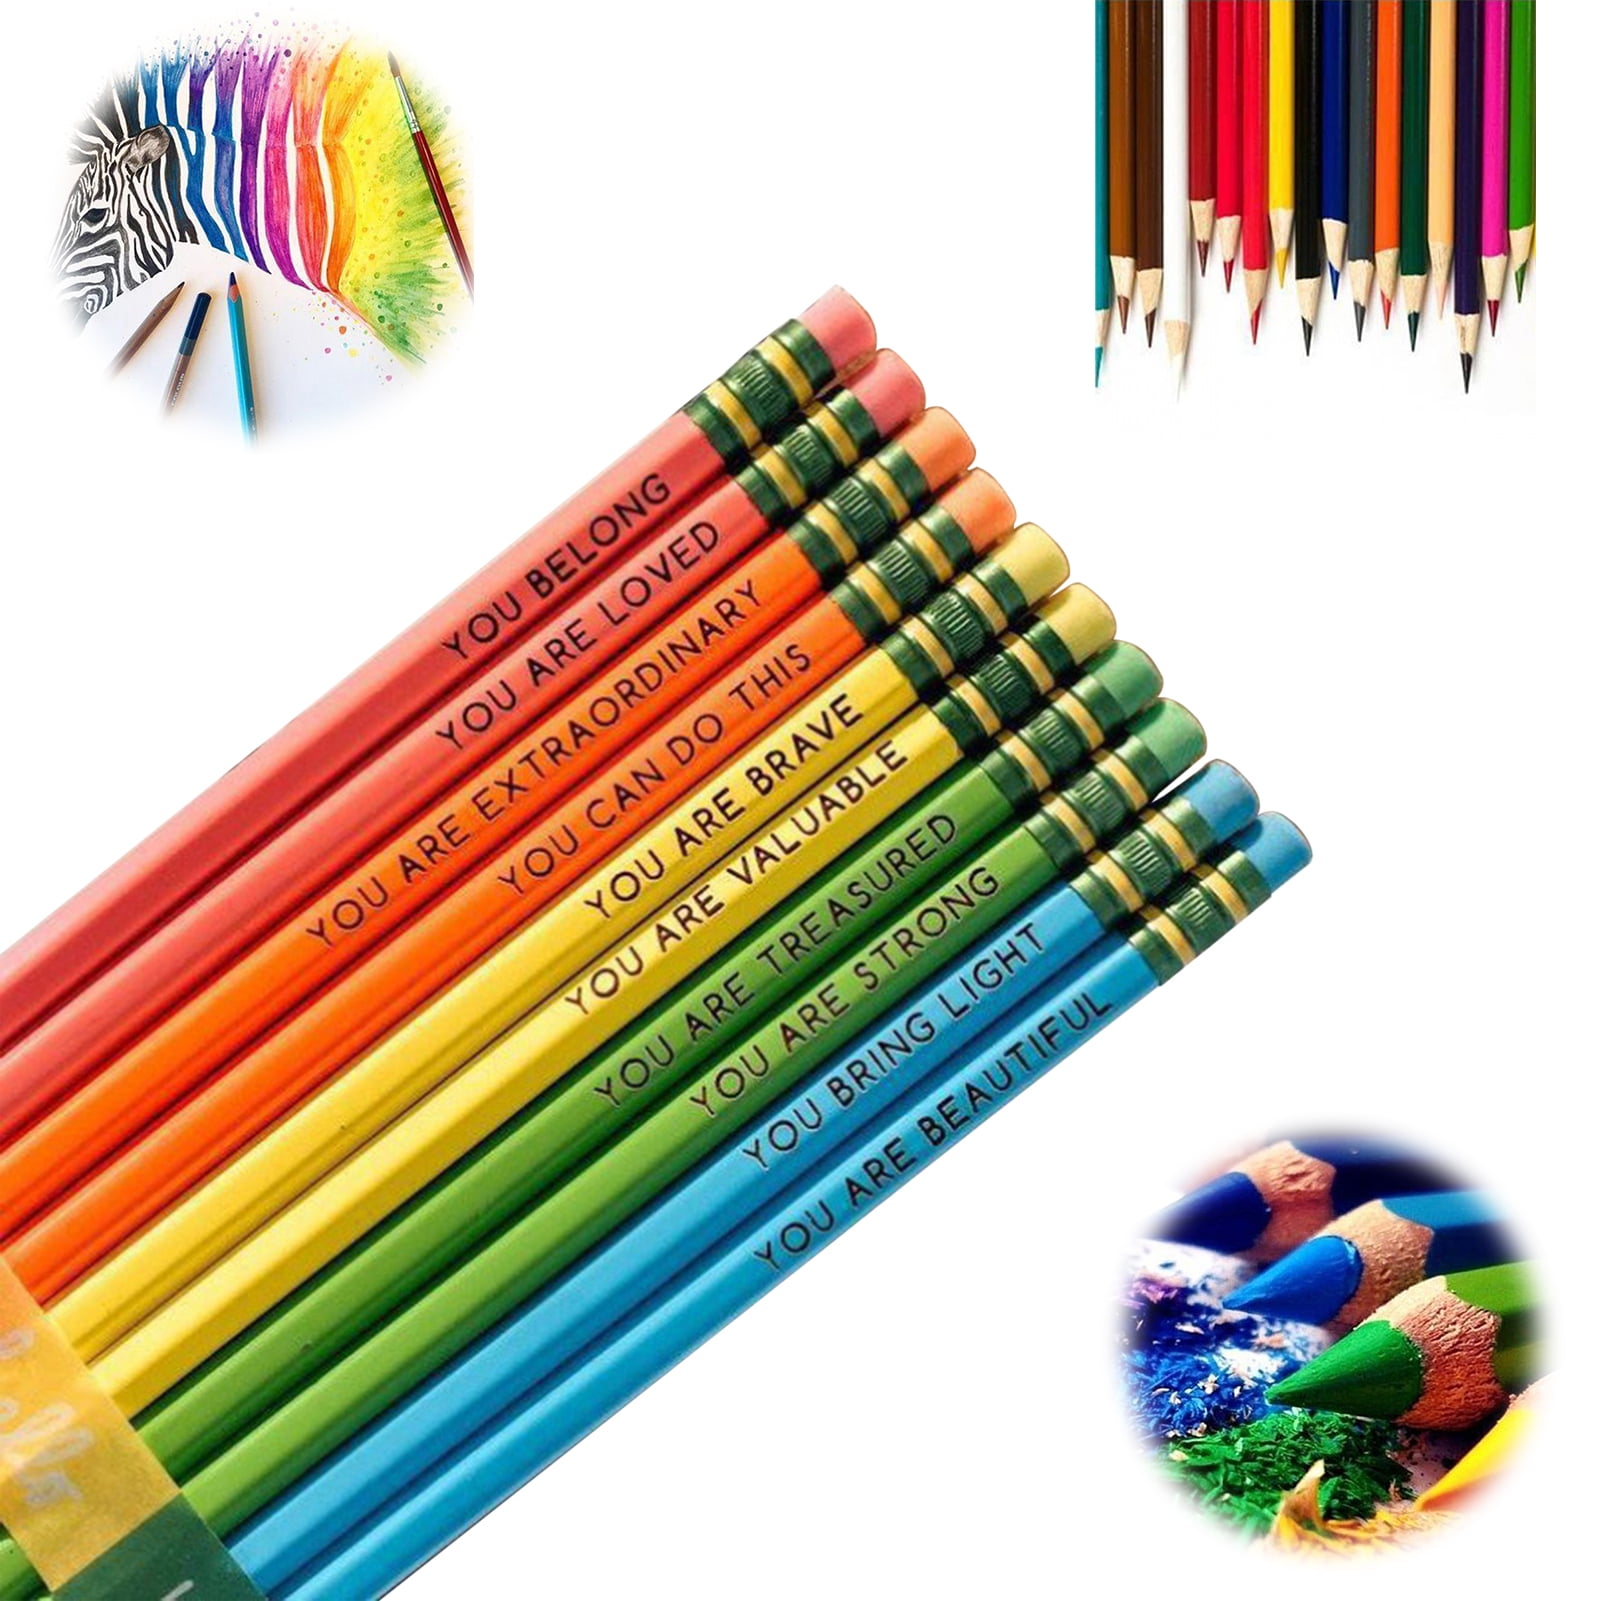 10pcs/St Random Mixed Color Hb Pencils For Drawing, Student'S Gift,  Christmas Stationery